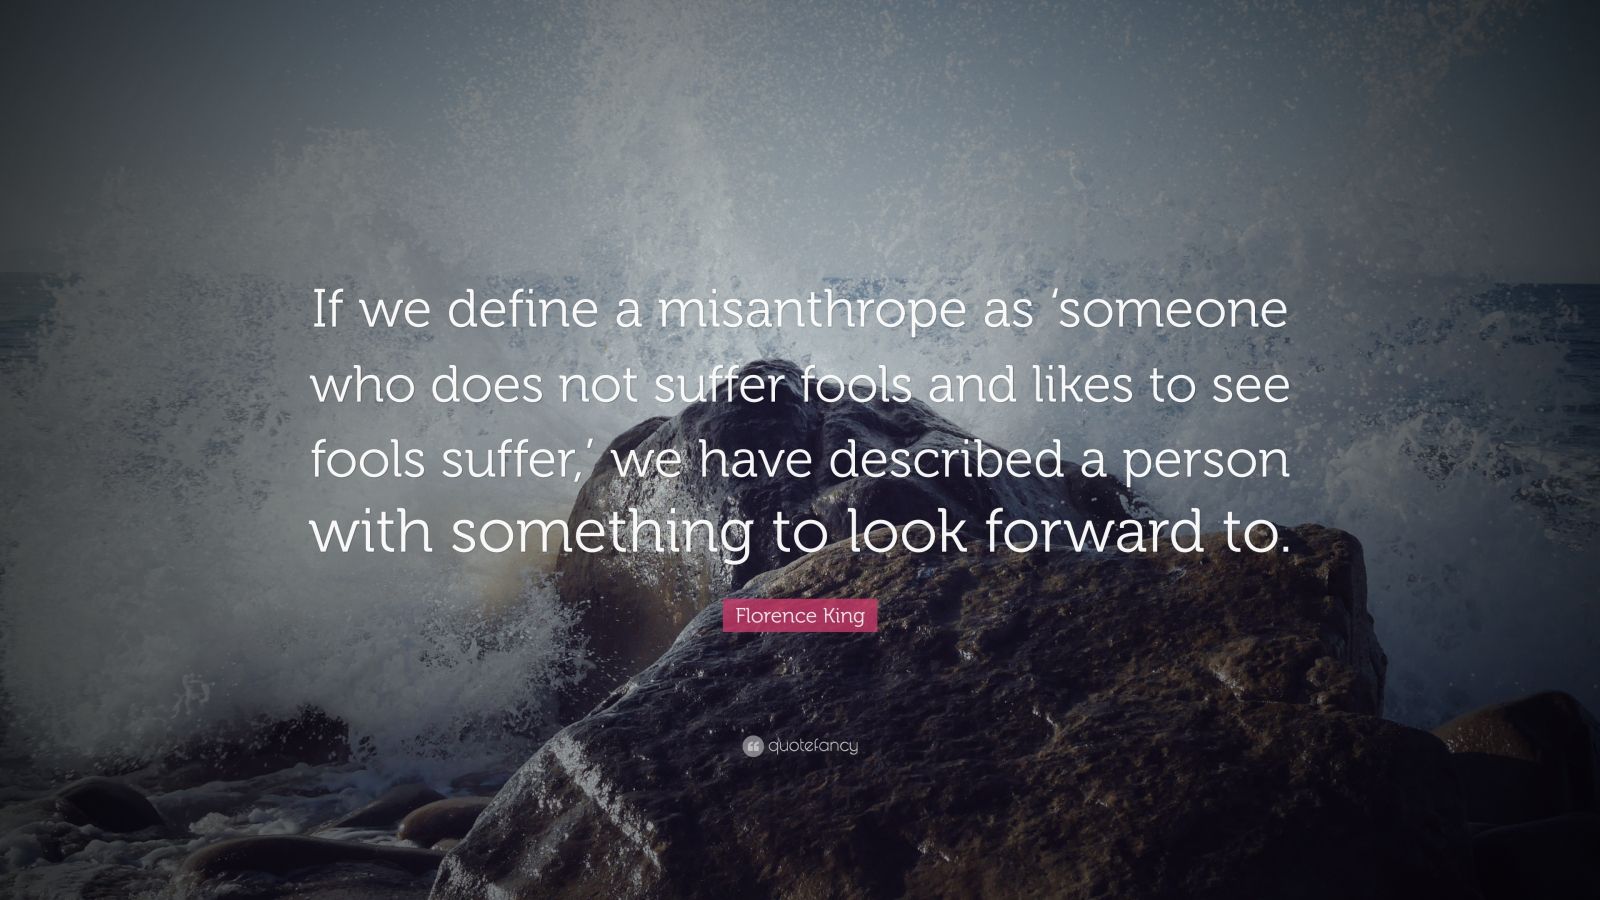 Florence King Quote If We Define A Misanthrope As Someone Who Does Not Suffer Fools And Likes